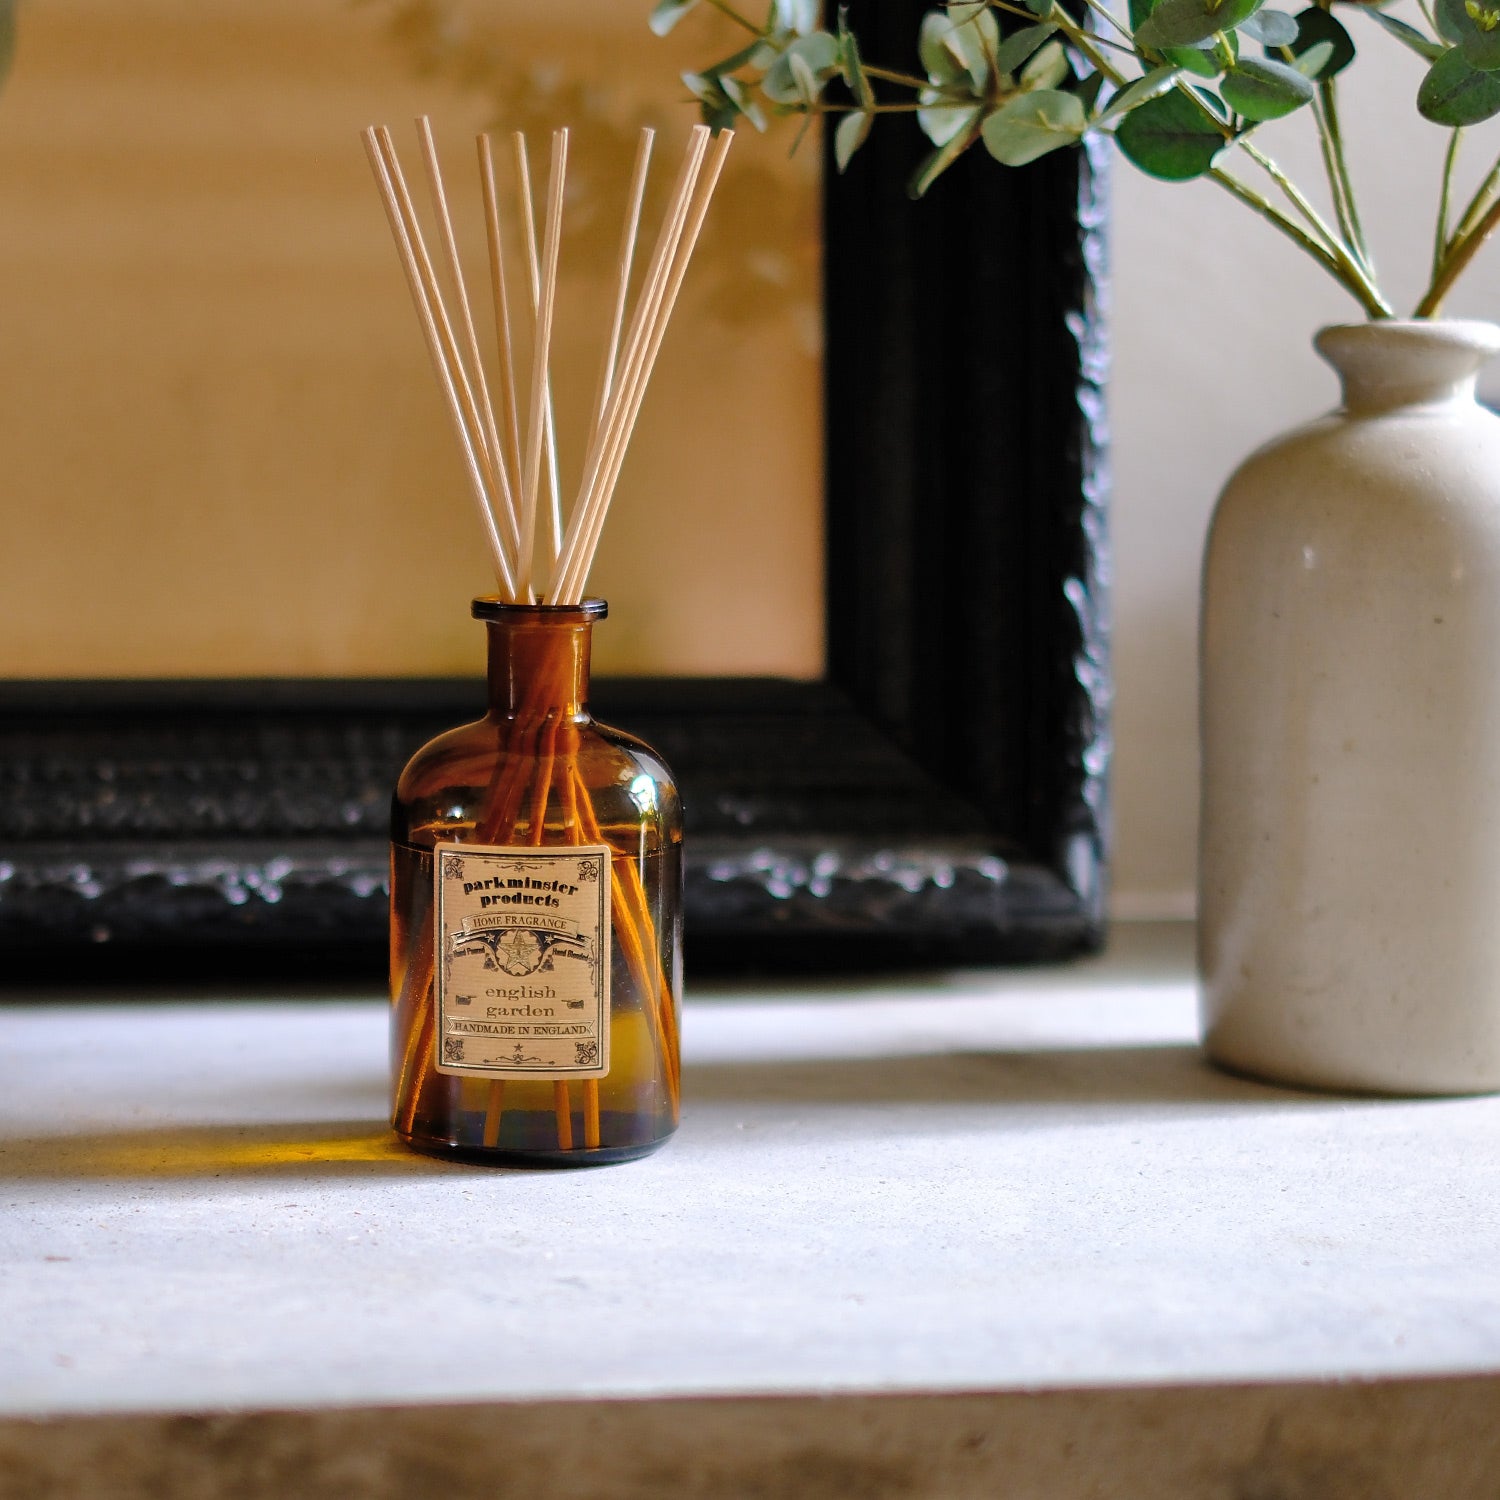 Experience the English Garden Reed Diffuser from Parkminster, 200ml scent reminiscent of a flower-filled English cottage garden, part of the Apothecary Collection, made in Cornwall